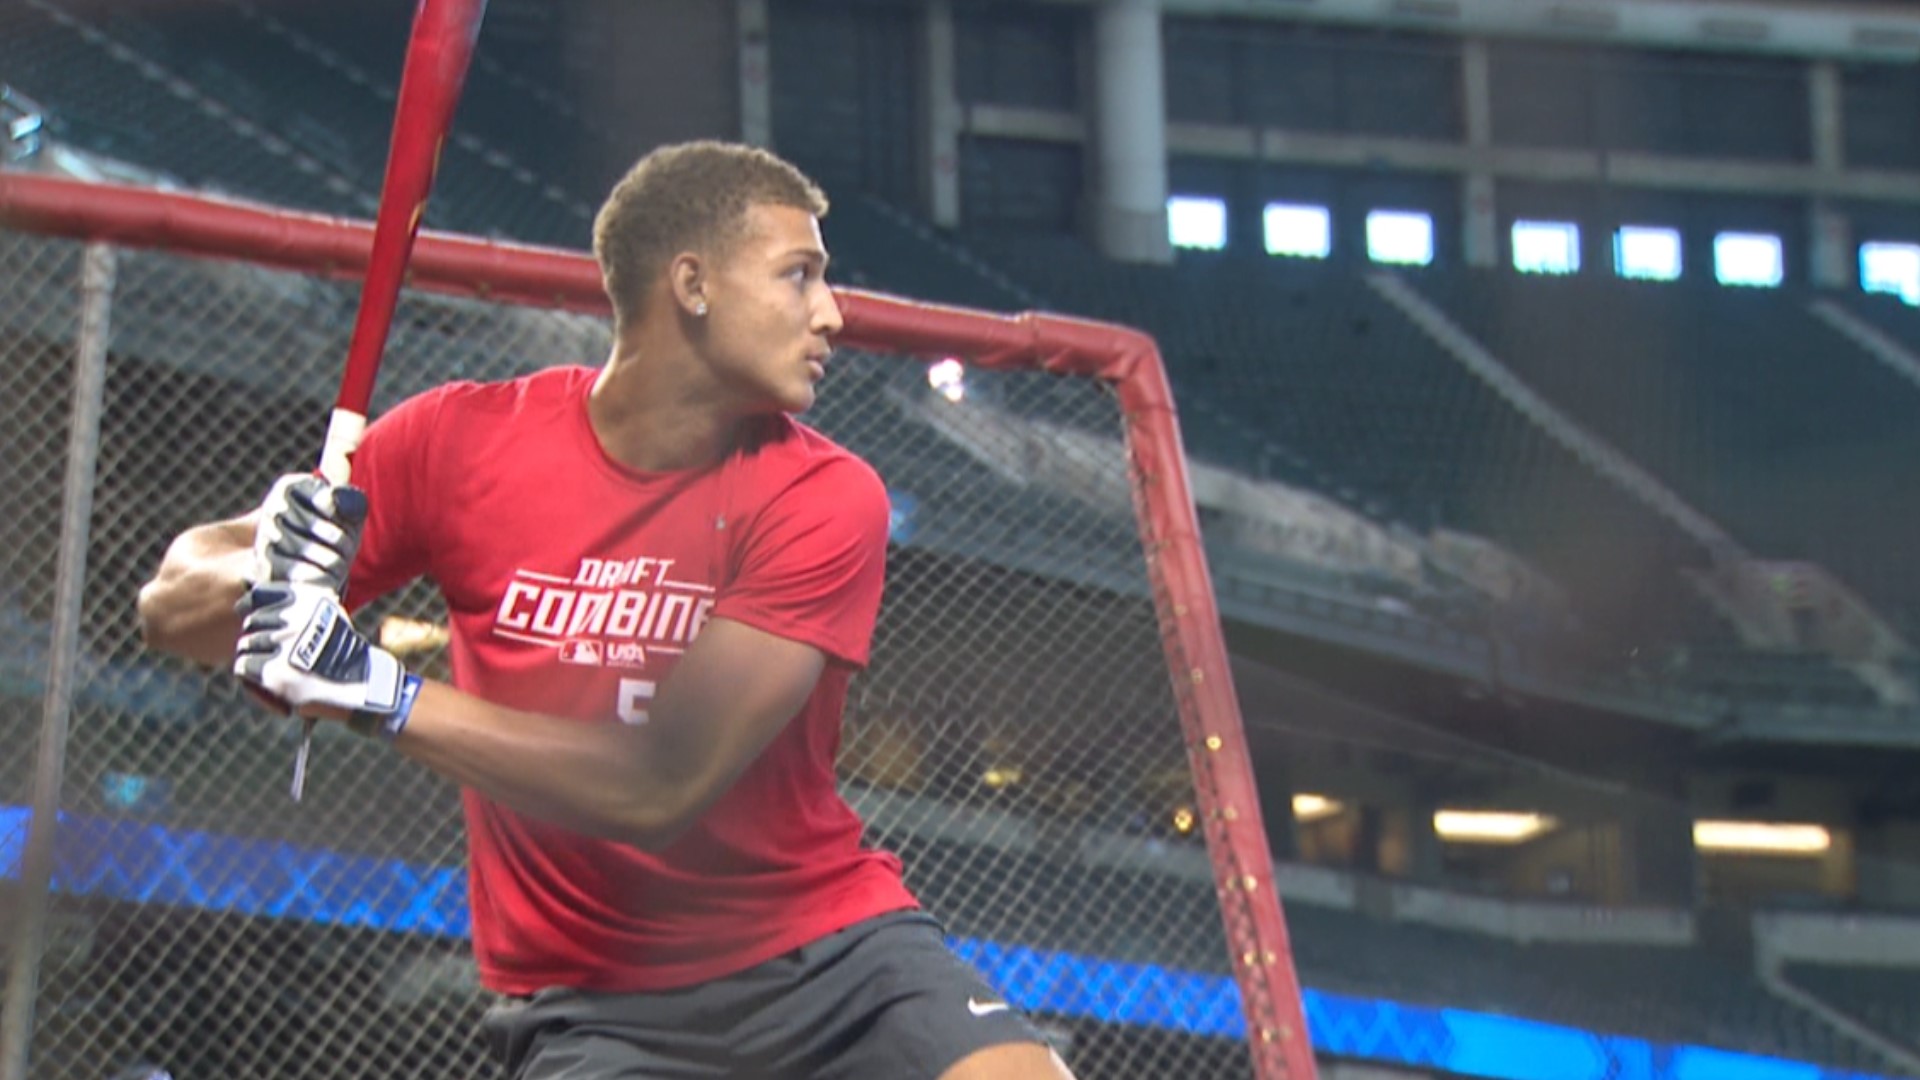 Top prospects showcased their skills in front of MLB scouts this week at Chase Field.